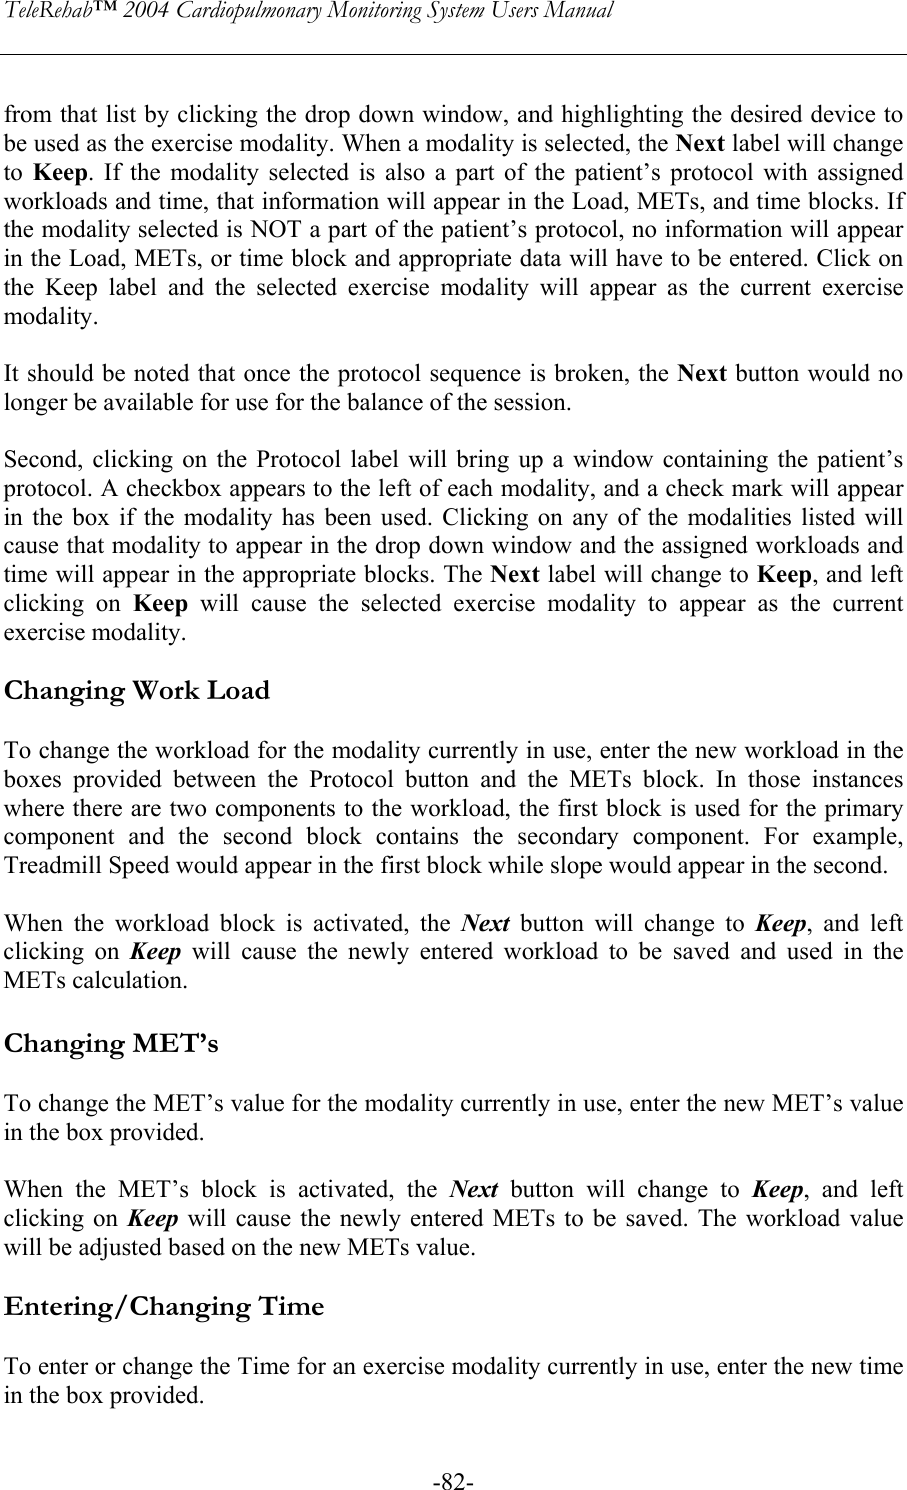 TeleRehab™ 2004 Cardiopulmonary Monitoring System Users Manual    -82- from that list by clicking the drop down window, and highlighting the desired device to be used as the exercise modality. When a modality is selected, the Next label will change to  Keep. If the modality selected is also a part of the patient’s protocol with assigned workloads and time, that information will appear in the Load, METs, and time blocks. If the modality selected is NOT a part of the patient’s protocol, no information will appear in the Load, METs, or time block and appropriate data will have to be entered. Click on the Keep label and the selected exercise modality will appear as the current exercise modality.   It should be noted that once the protocol sequence is broken, the Next button would no longer be available for use for the balance of the session.  Second, clicking on the Protocol label will bring up a window containing the patient’s protocol. A checkbox appears to the left of each modality, and a check mark will appear in the box if the modality has been used. Clicking on any of the modalities listed will cause that modality to appear in the drop down window and the assigned workloads and time will appear in the appropriate blocks. The Next label will change to Keep, and left clicking on Keep will cause the selected exercise modality to appear as the current exercise modality.  Changing Work Load  To change the workload for the modality currently in use, enter the new workload in the boxes provided between the Protocol button and the METs block. In those instances where there are two components to the workload, the first block is used for the primary component and the second block contains the secondary component. For example, Treadmill Speed would appear in the first block while slope would appear in the second.  When the workload block is activated, the Next button will change to Keep, and left clicking on Keep will cause the newly entered workload to be saved and used in the METs calculation.  Changing MET’s  To change the MET’s value for the modality currently in use, enter the new MET’s value in the box provided.   When the MET’s block is activated, the Next button will change to Keep, and left clicking on Keep will cause the newly entered METs to be saved. The workload value will be adjusted based on the new METs value.  Entering/Changing Time  To enter or change the Time for an exercise modality currently in use, enter the new time in the box provided.  